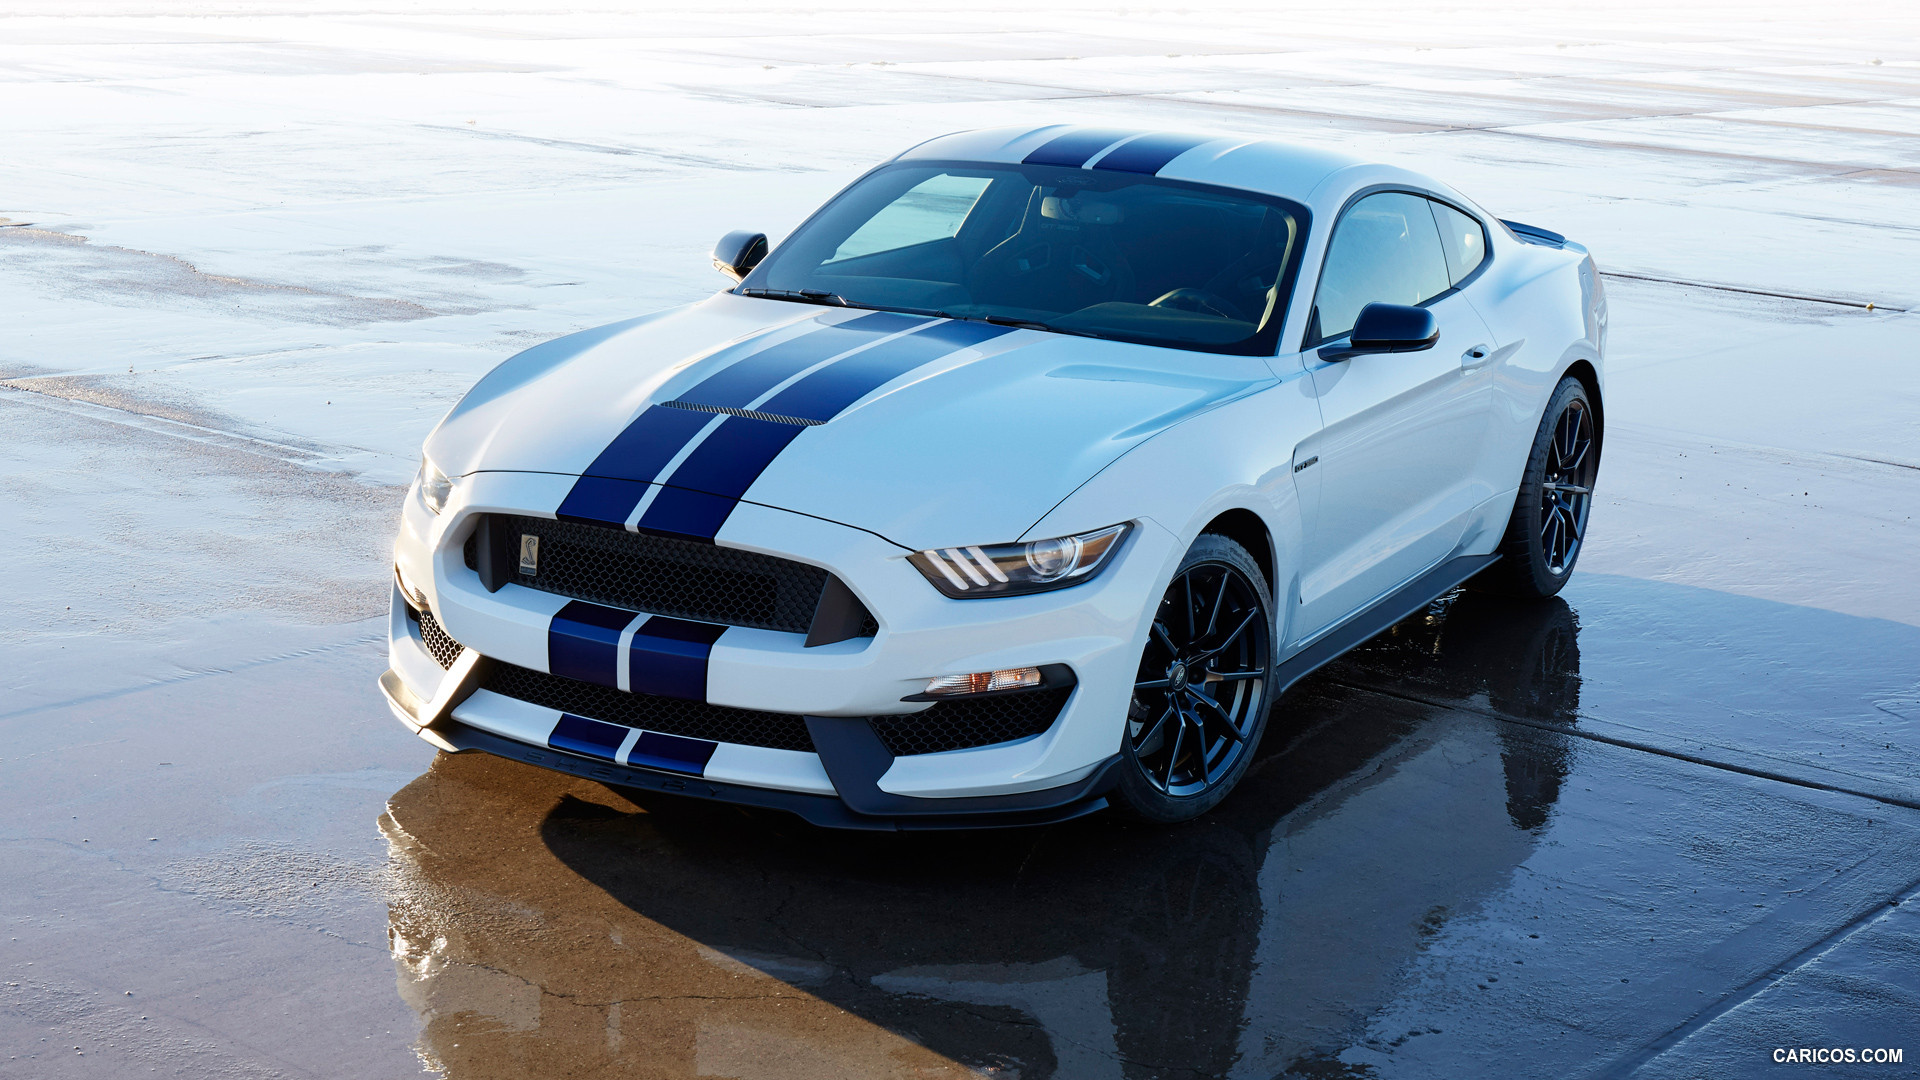 2016 Ford Mustang Shelby Gt350 Front Hd Wallpaper 10 1920x1080